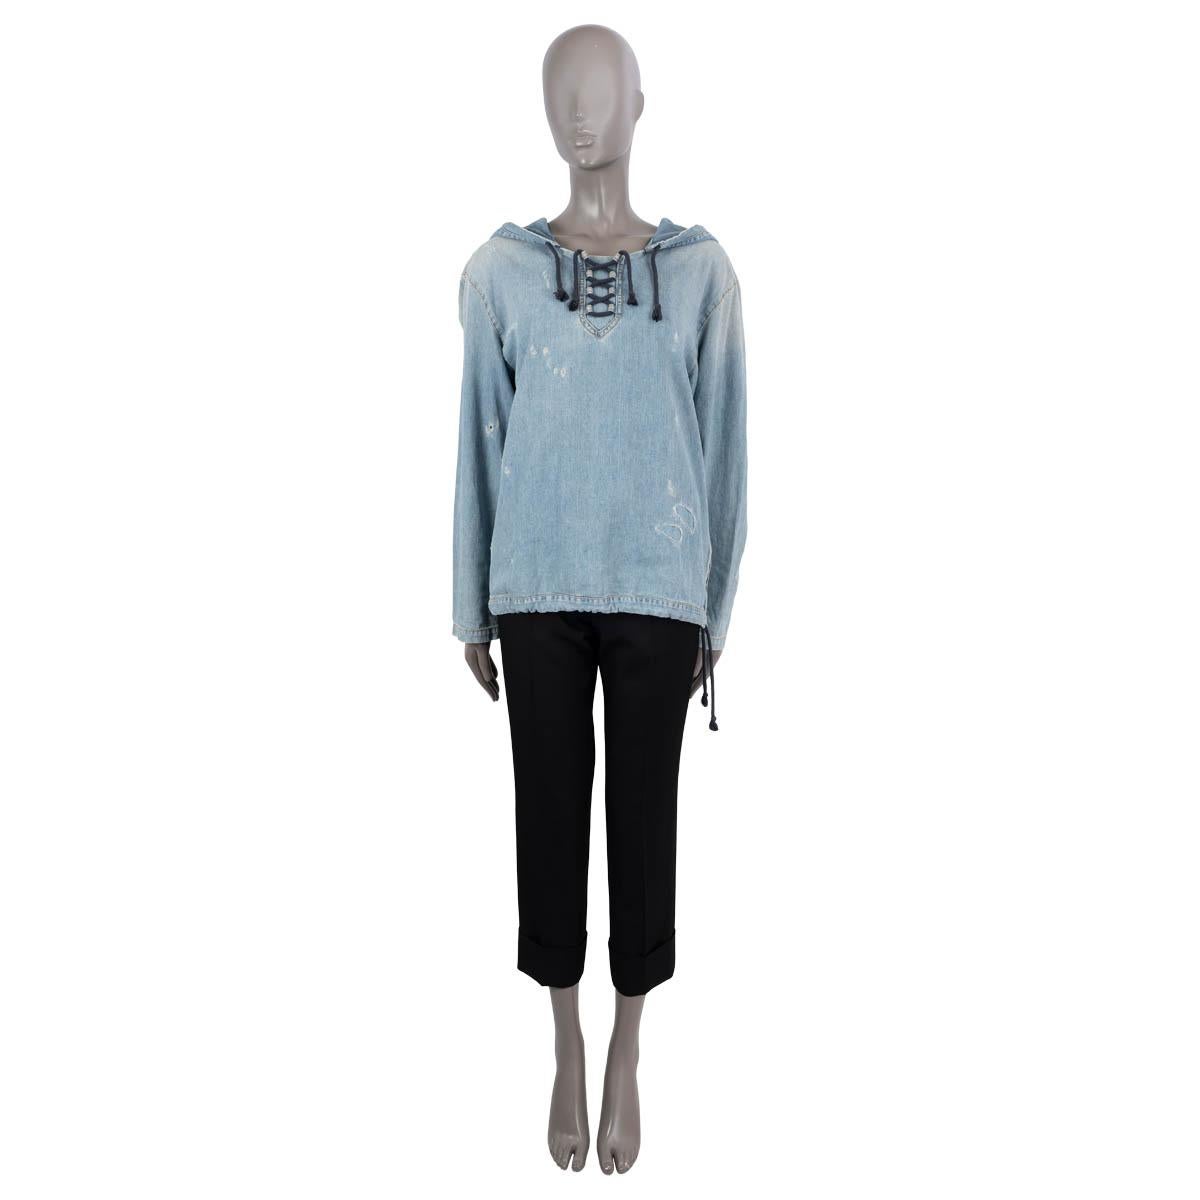 100% authentic Saint Laurent distressed denim hoodie in light blue cotton (100%). Features dropped shoulders, a lace-up front fasting, drawstring hood and bottom hem with a short side zipper. Unlined. Has been worn and is in excellent